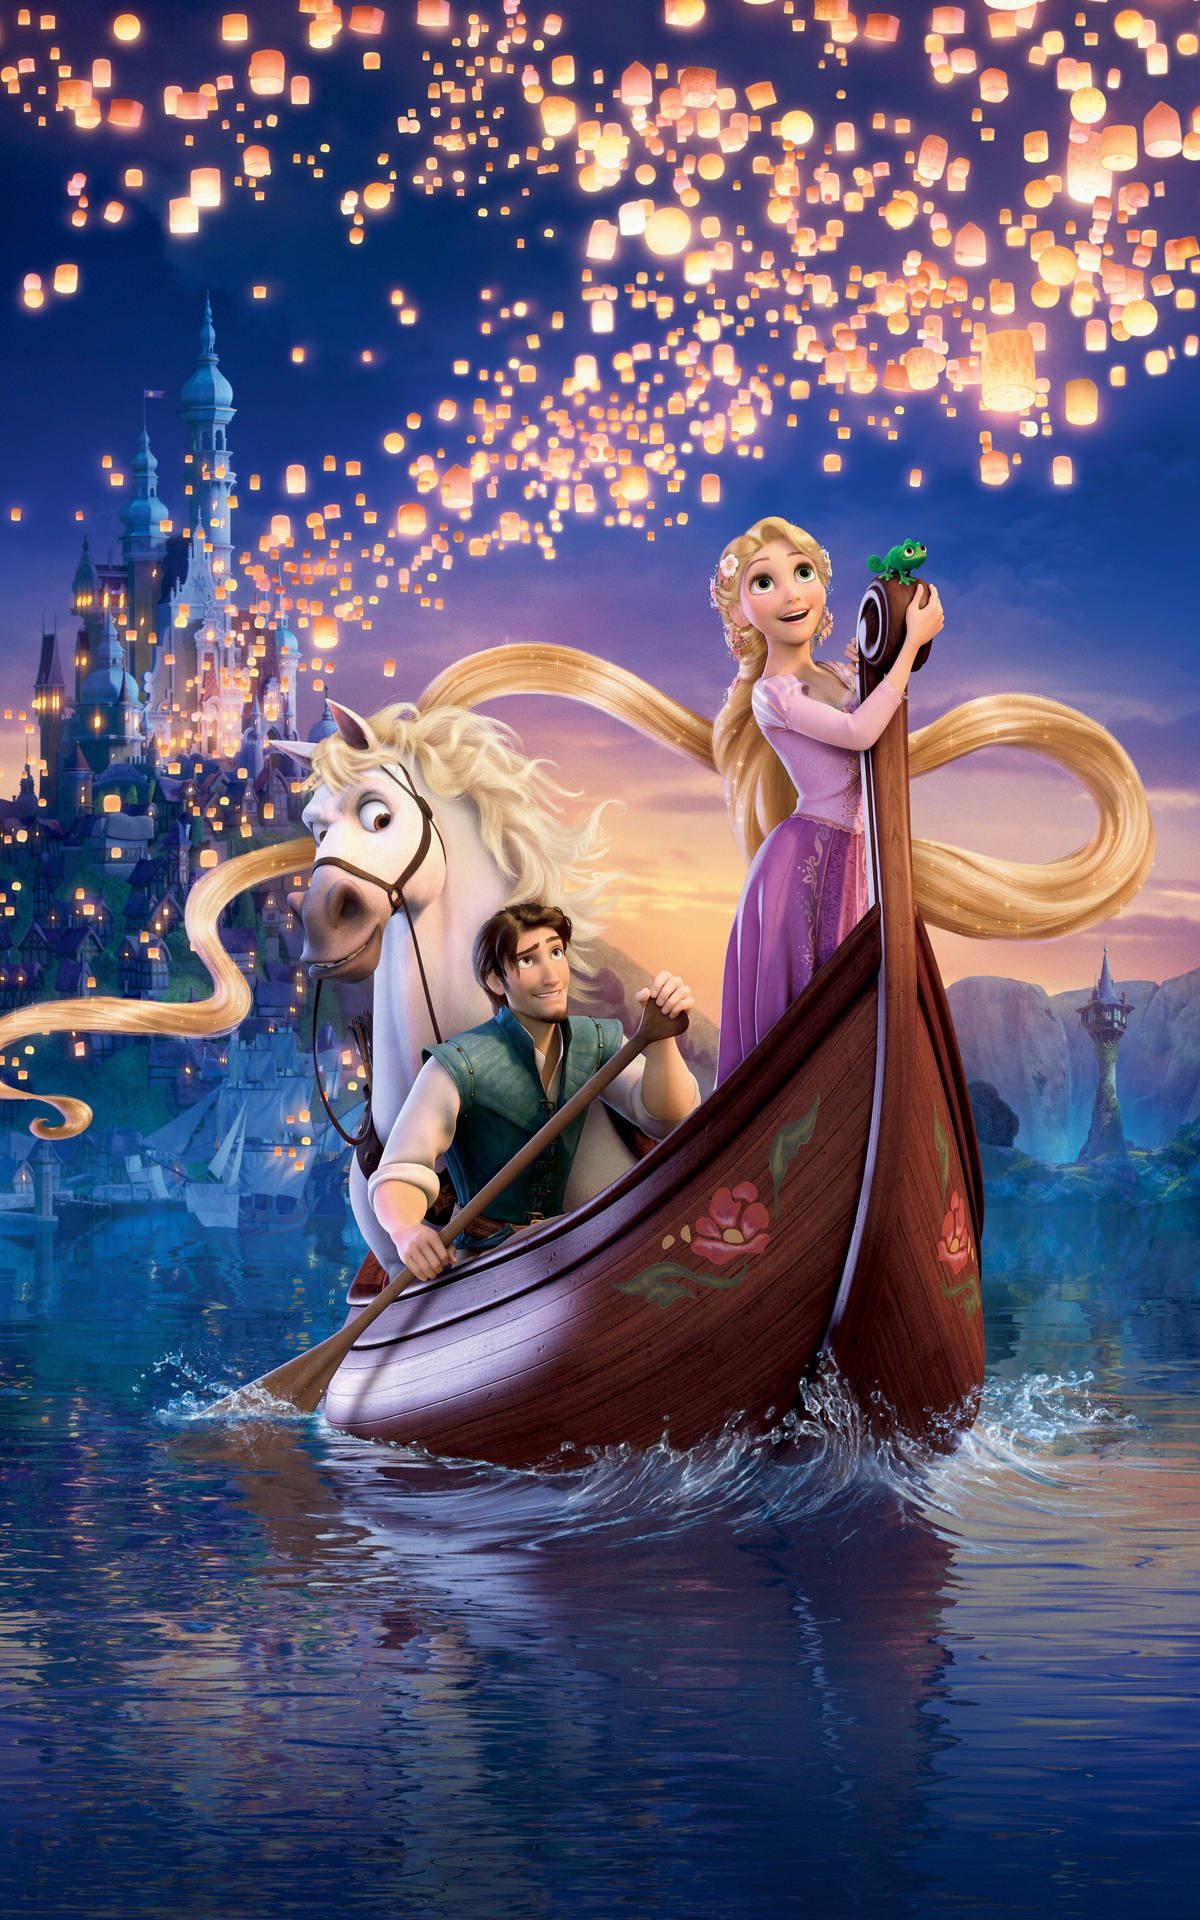 A cartoon of two people in the water - Rapunzel